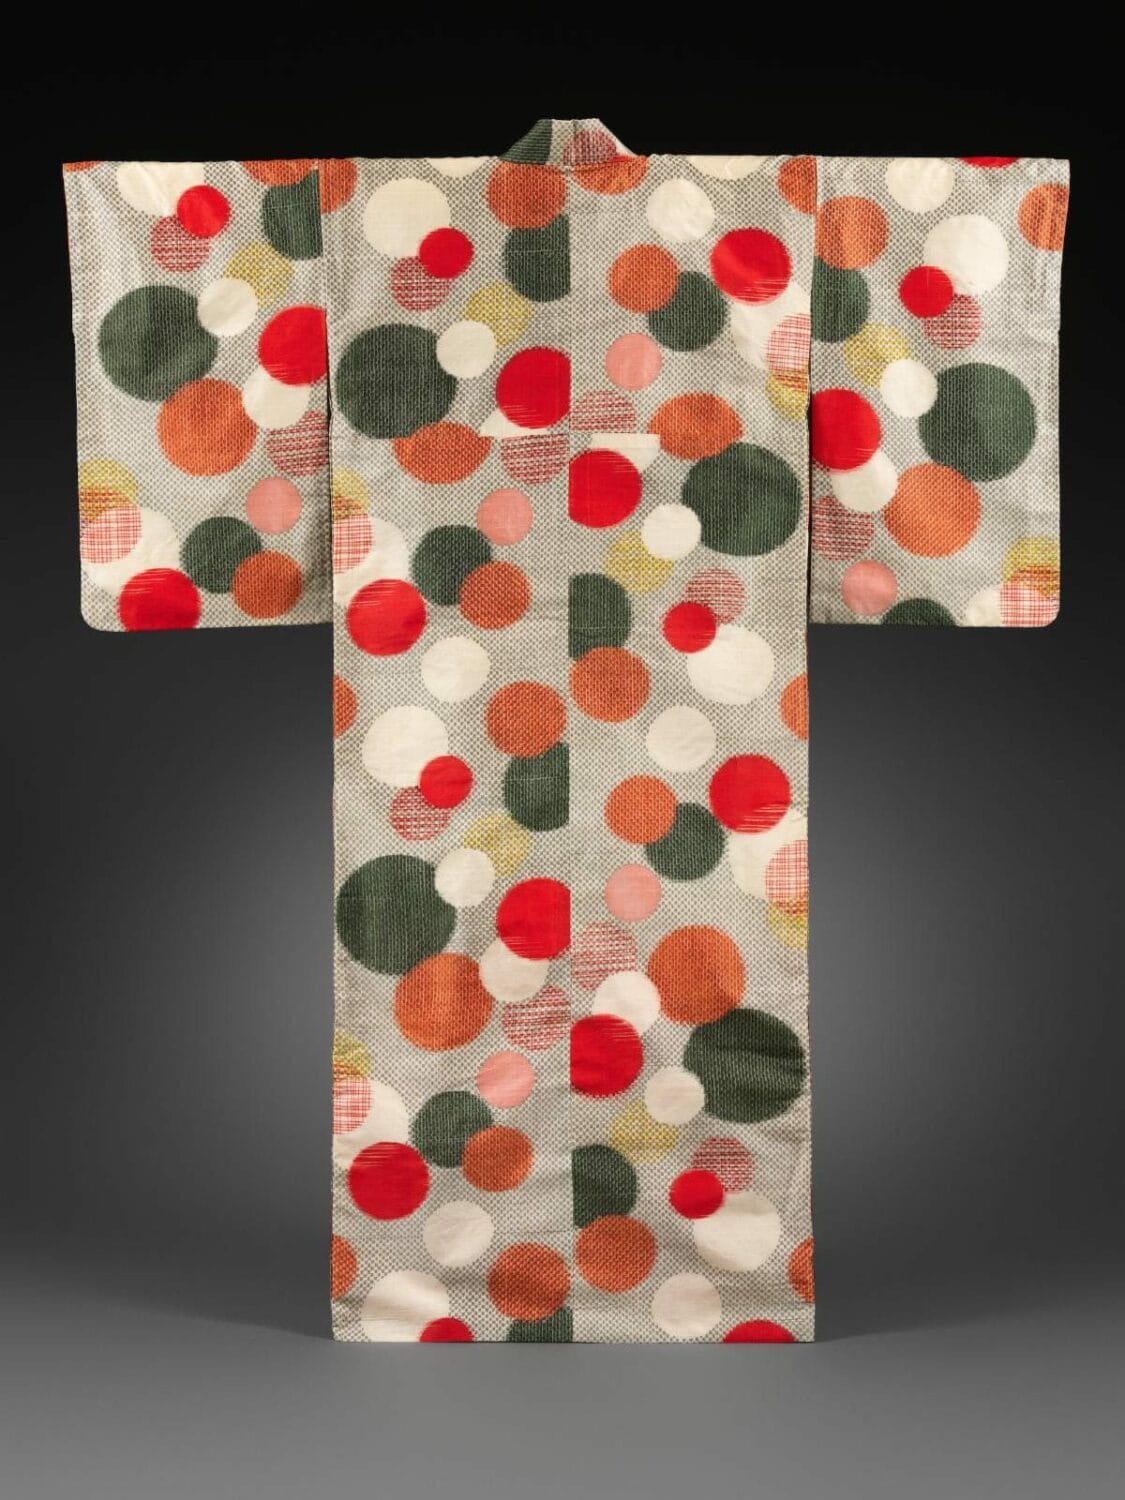 Meisen kimono with water droplets. Sh?wa period (1926–89), ca. 1930–40. Plain-weave reeled-silk warps with machine-spun silk wefts in double ikat (heiy?-gasuri). 59 x 49 1/4 in. (149.9 x 125.1 cm). Promised Gift of John C. Weber. Image © The Metropolitan Museum of Art, photo by Paul Lachenauer.